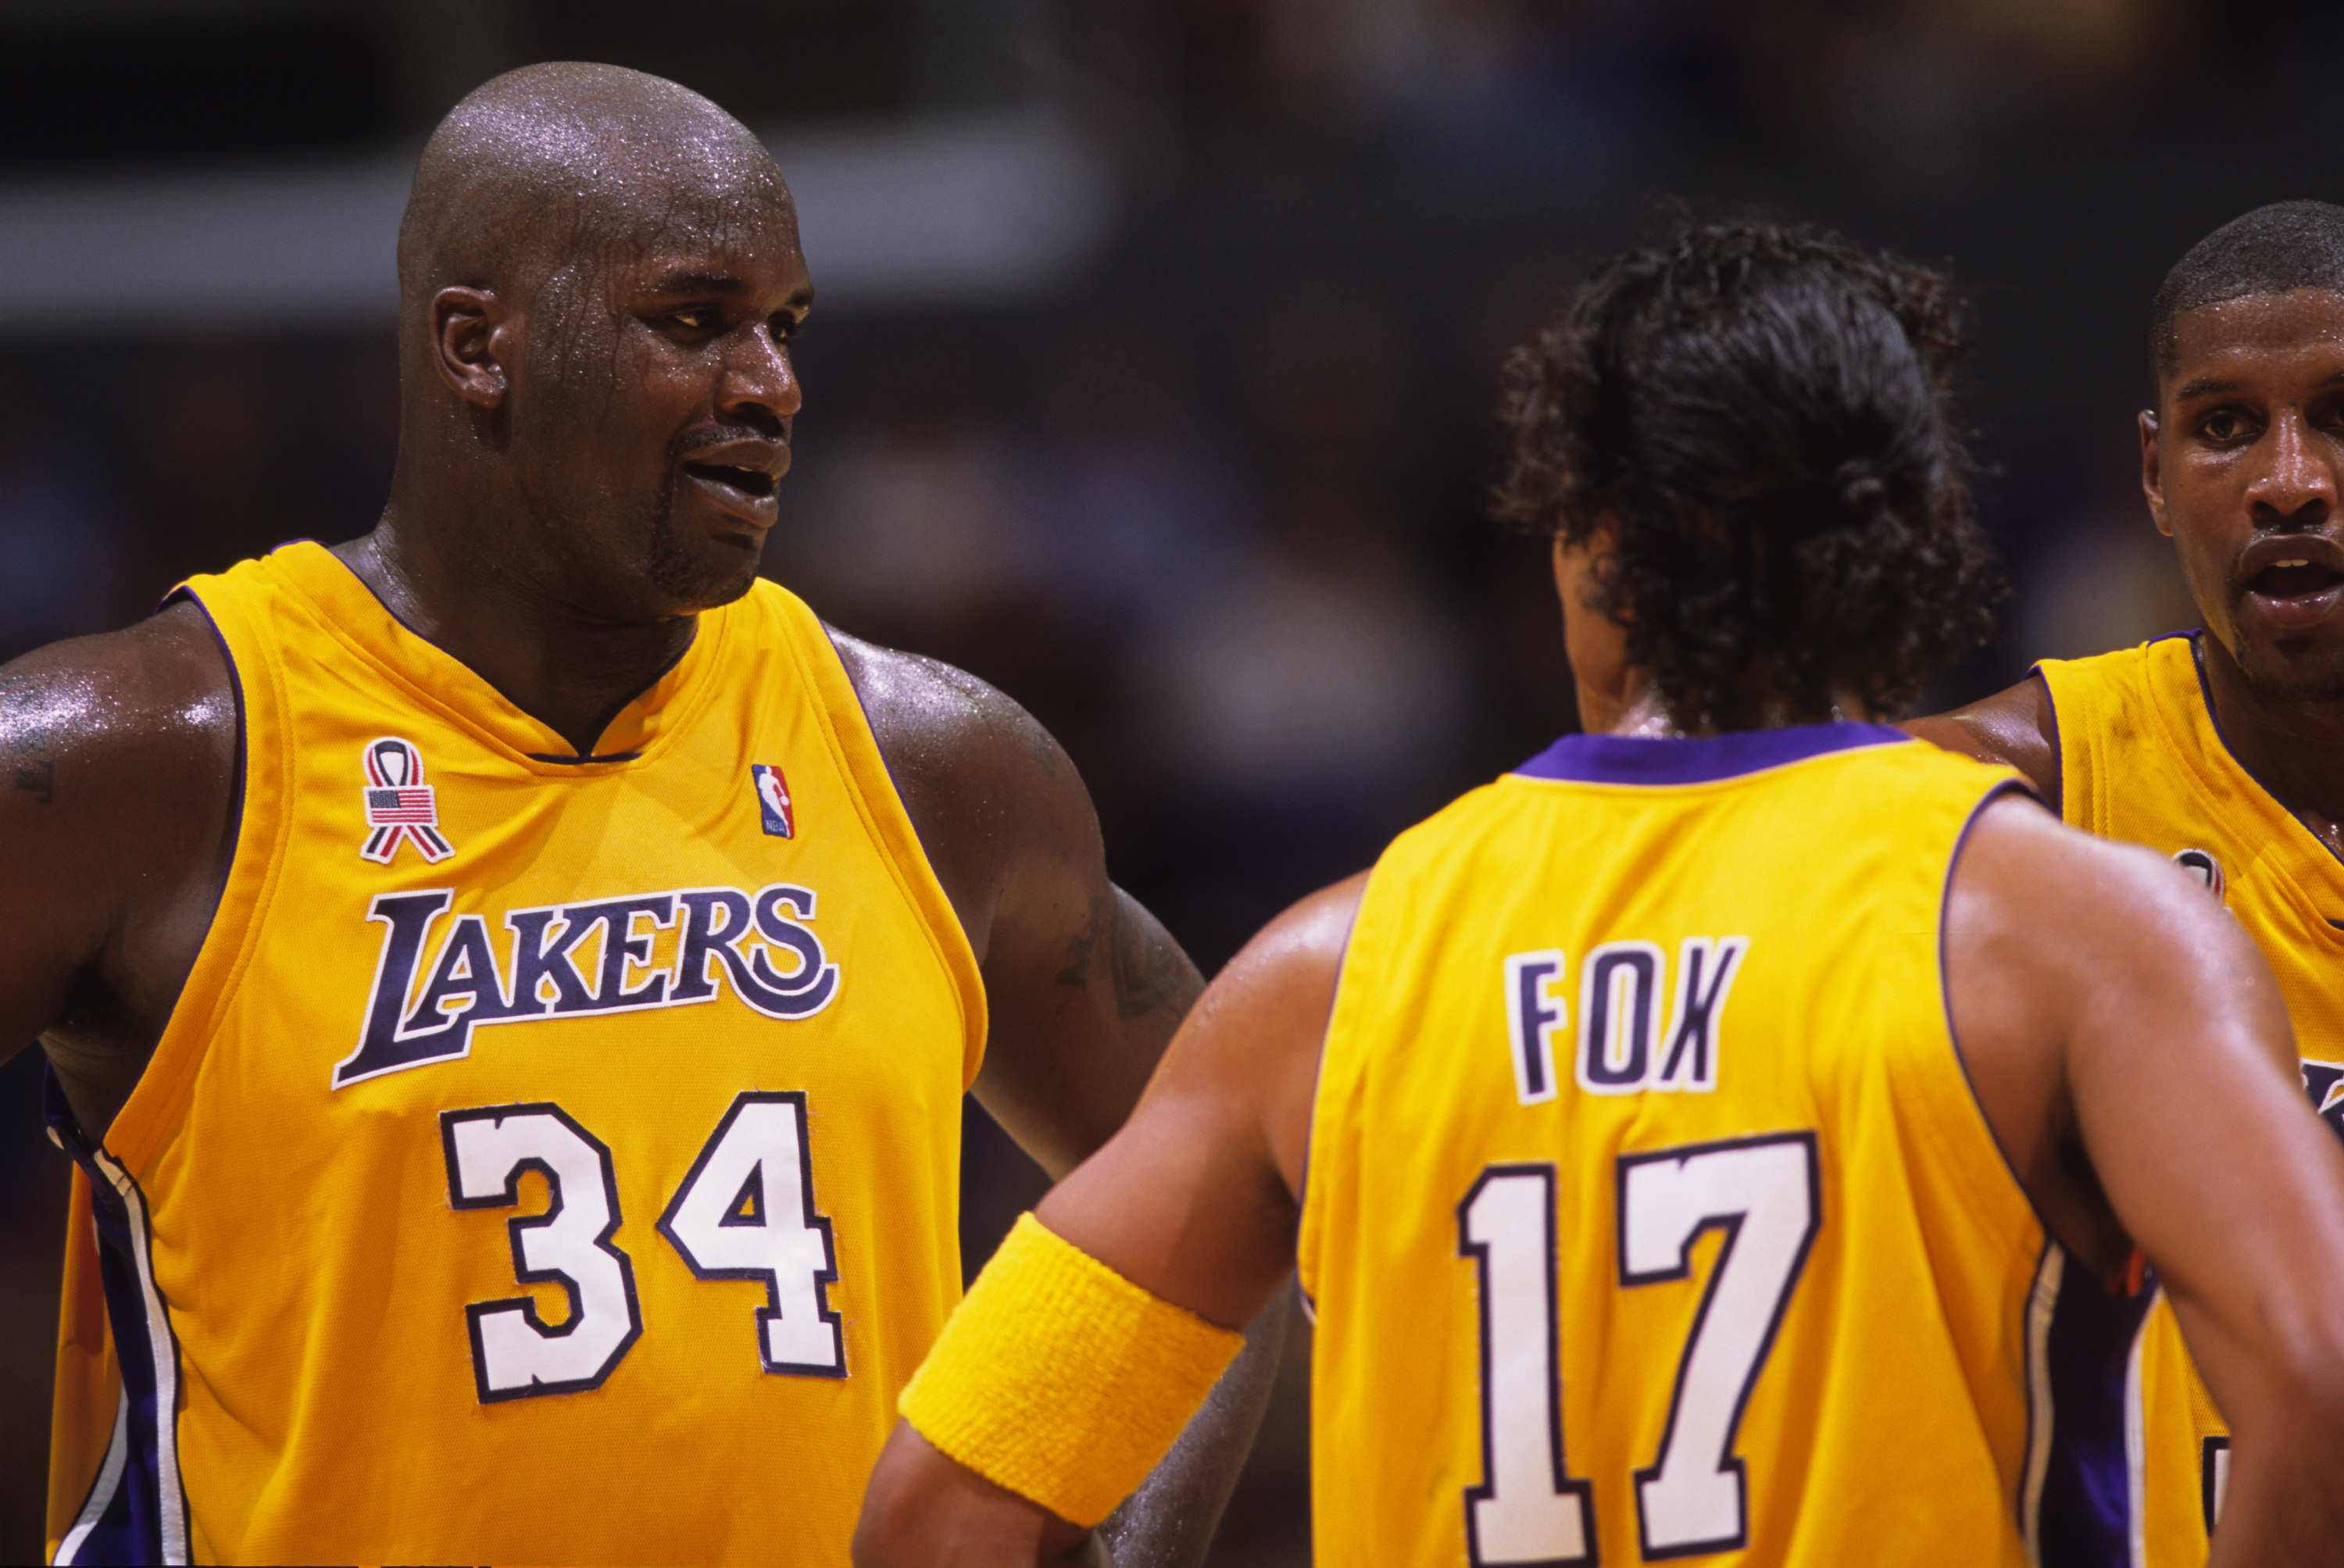 Shaquille O'Neal talks to former Lakers teammate Rick Fox